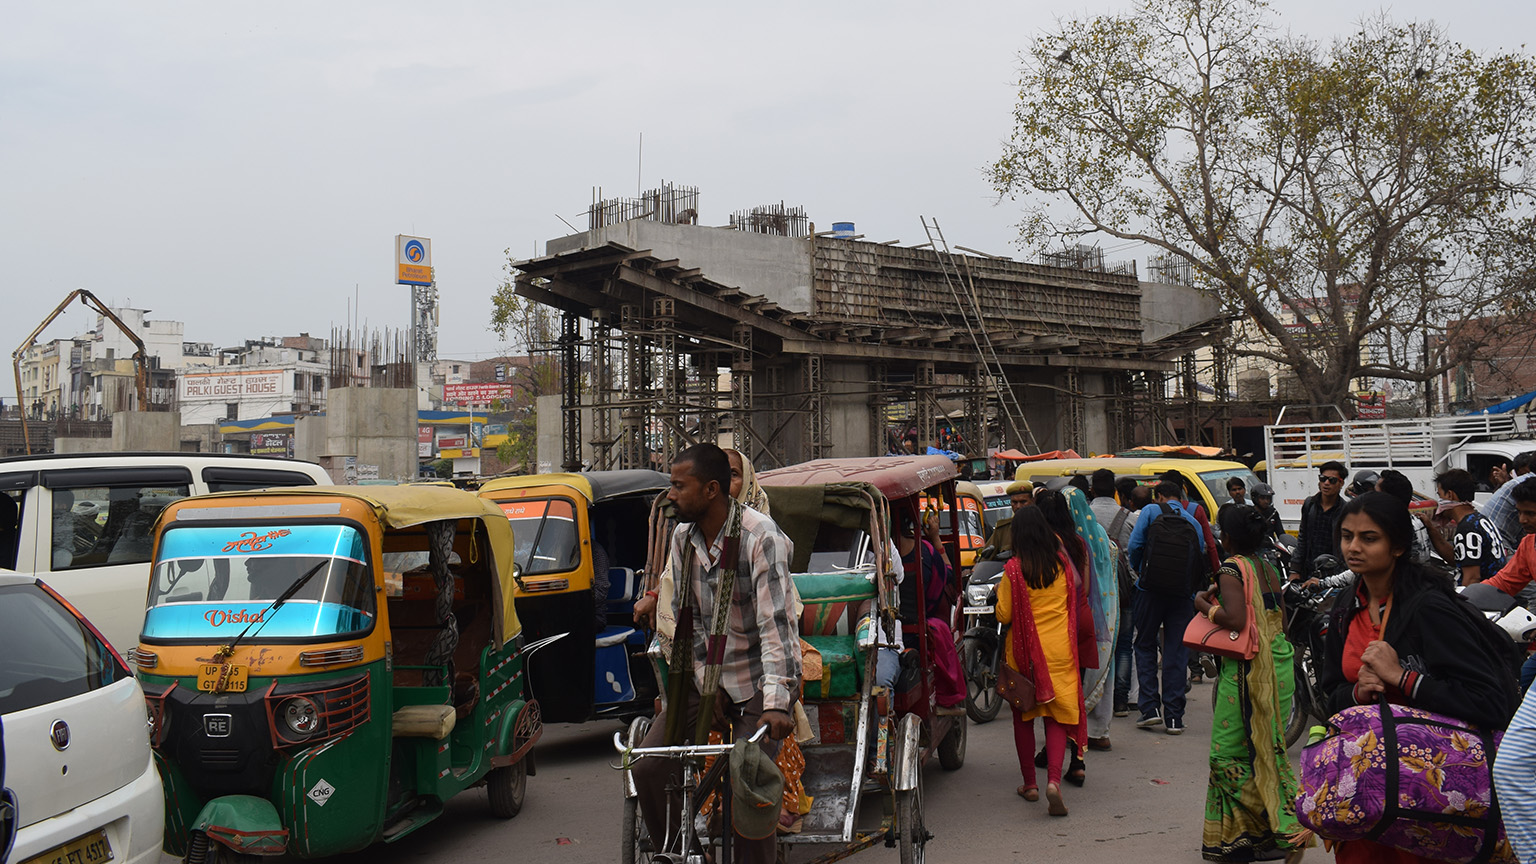 The area outside the transit station bustles with pedestrians. Construction for an overhead bridge is underway.